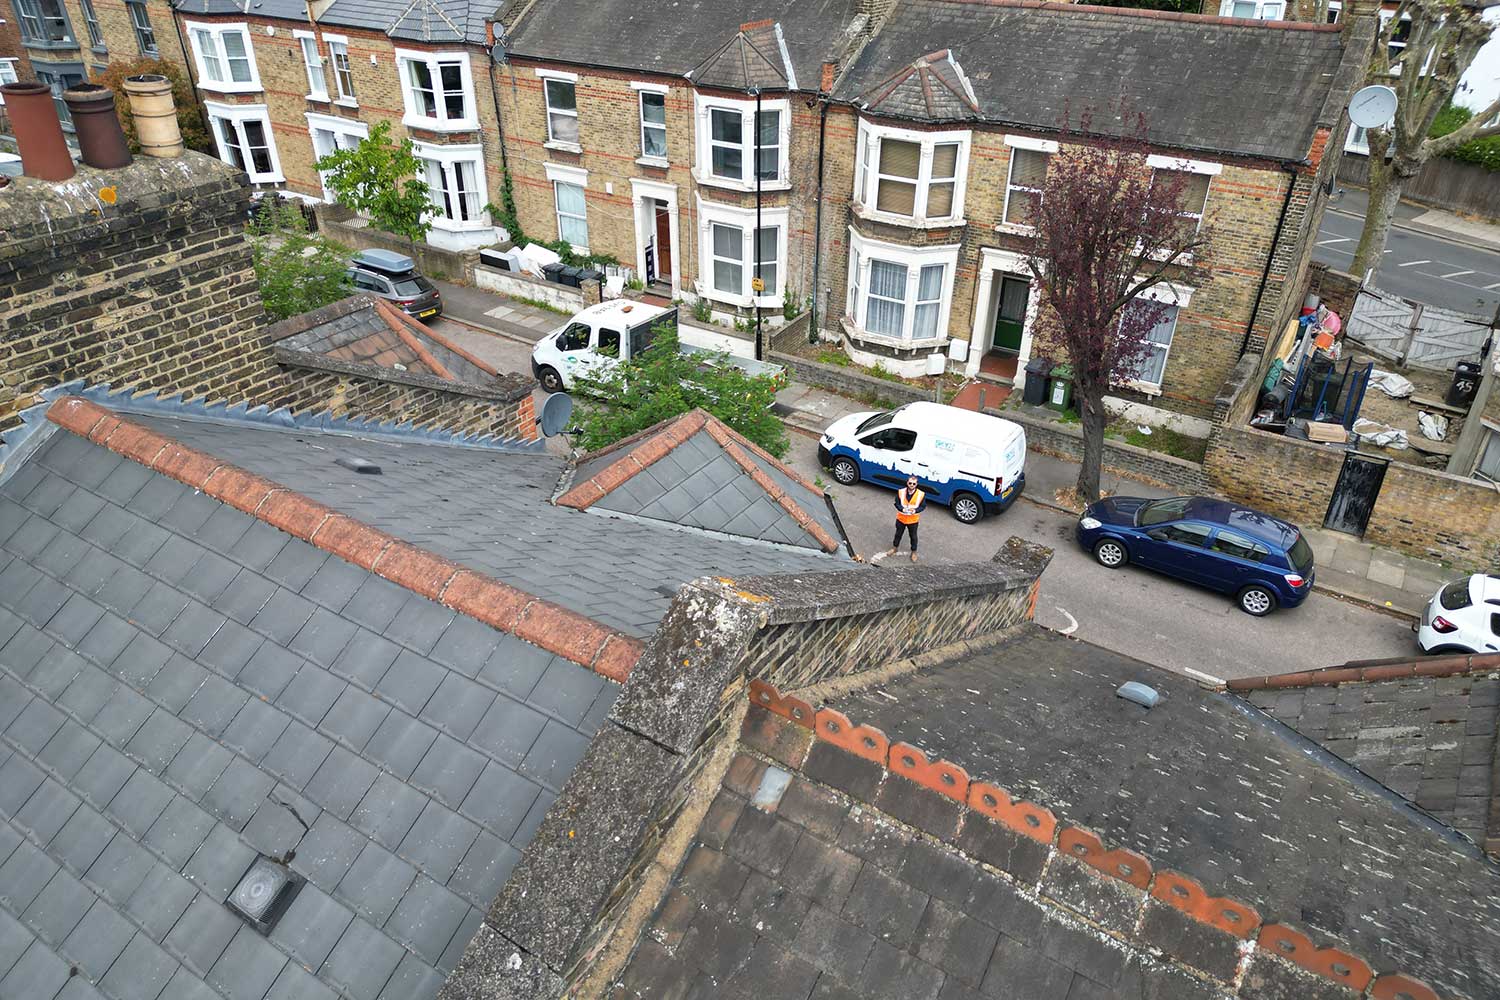 shot from drone hovering above the roof of a house looking down at the drone operator in the road below